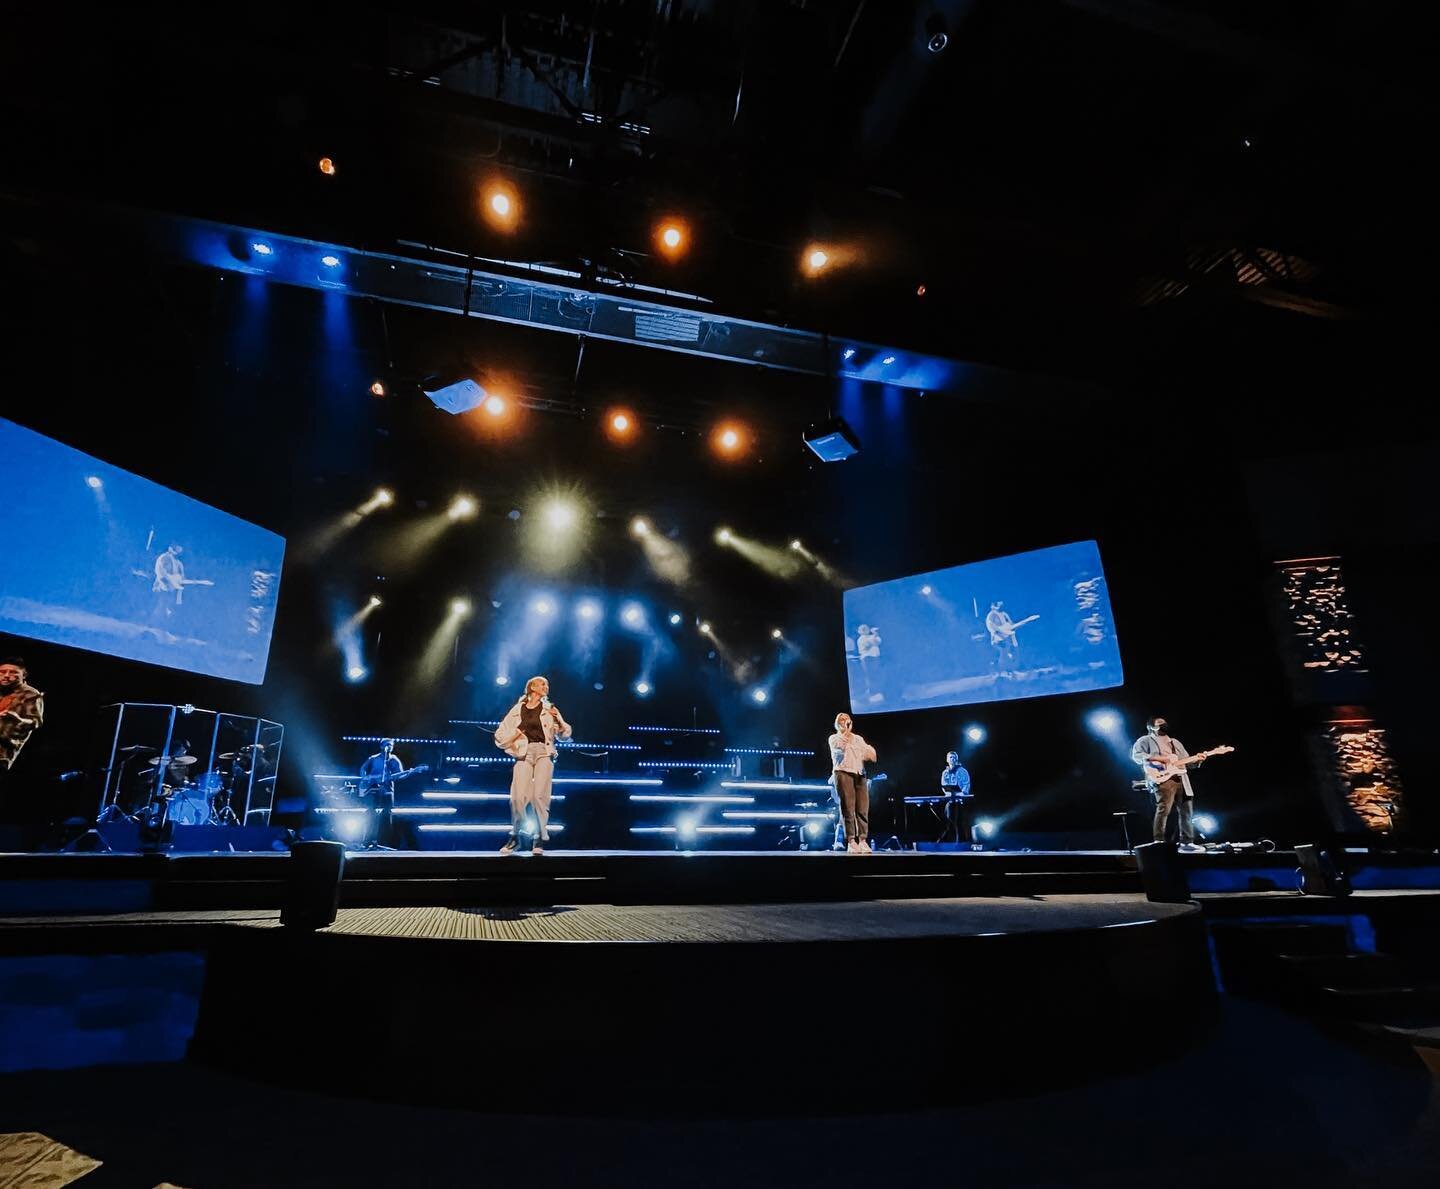 Our team is so thankful for Eastridge Church! We were honored to see a glimpse of what God is doing in and through this church this weekend. We love you, @eastridgechurch !